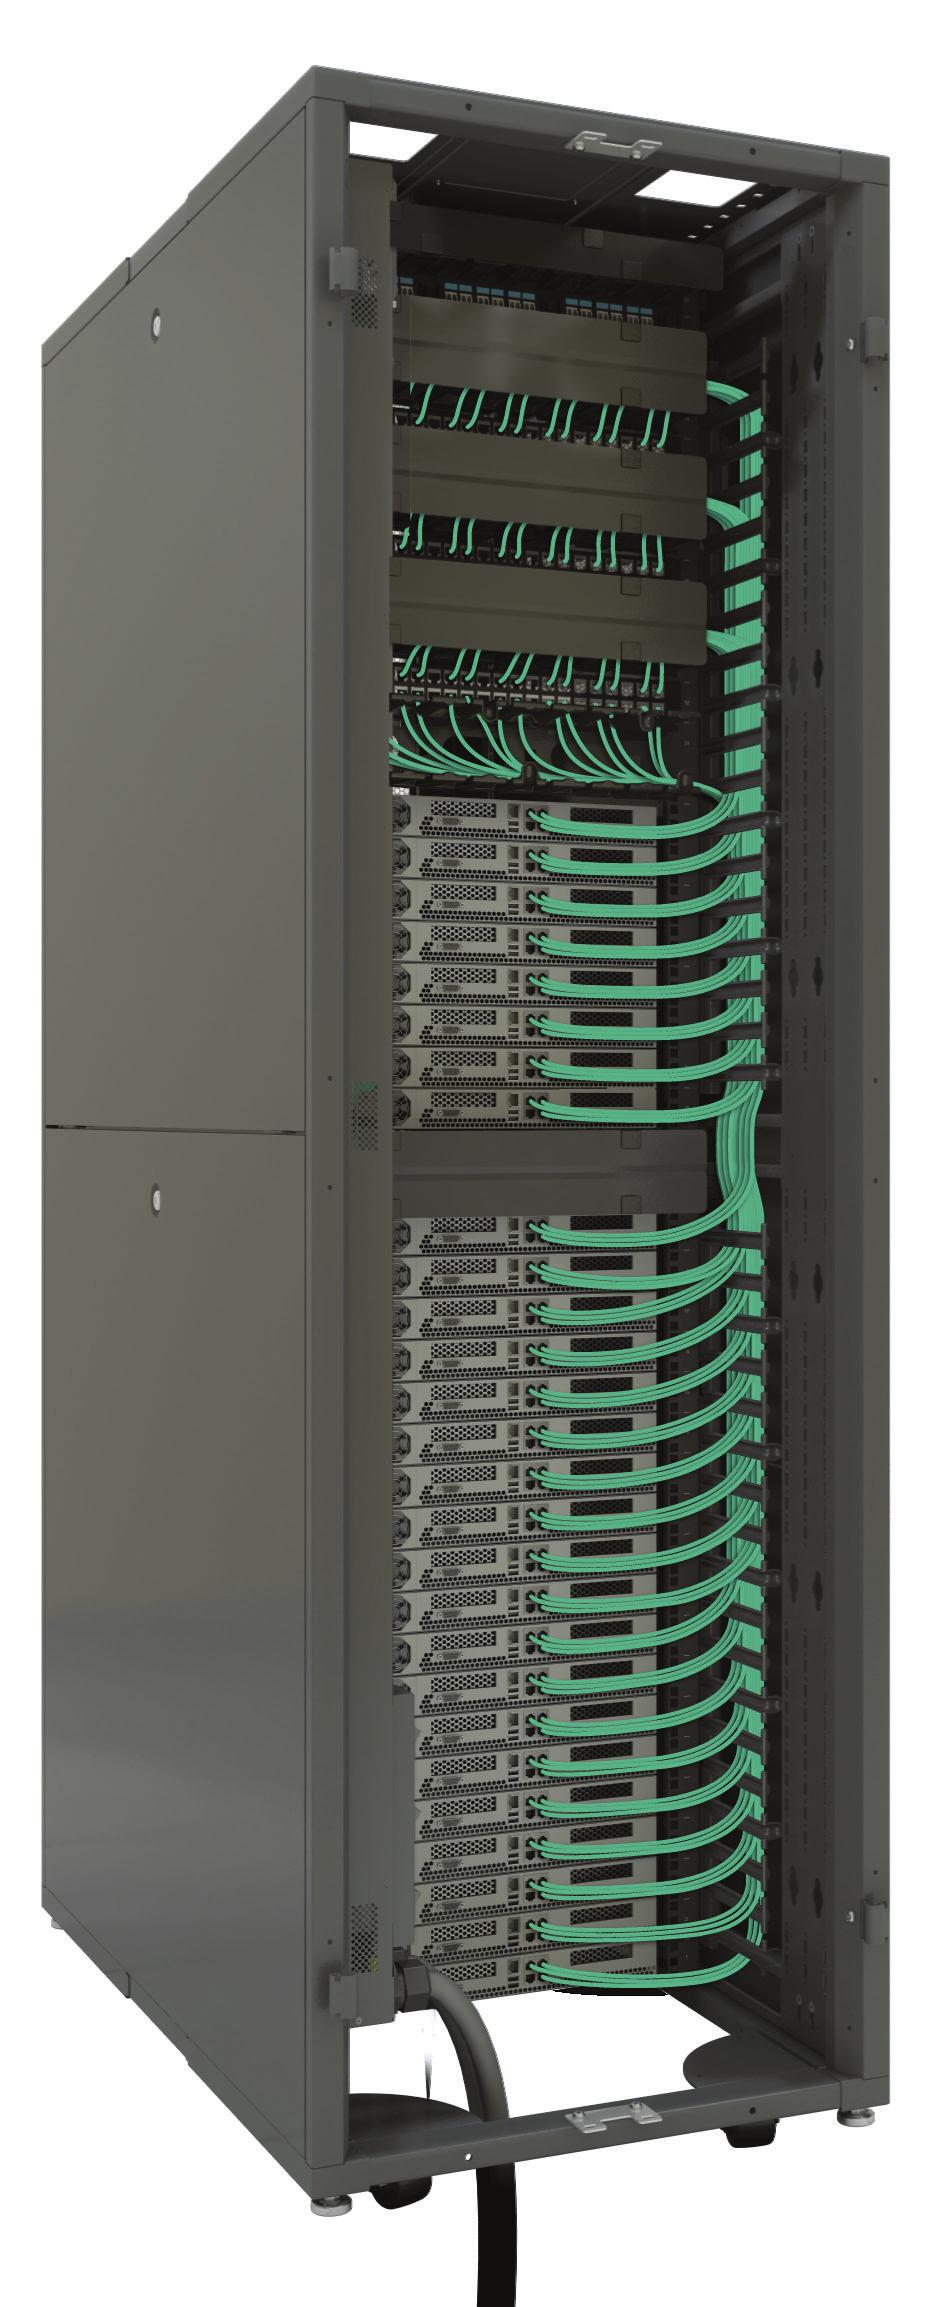 Cabling requirements unique to server cabinets: yyserver cabinets typically have the patching for